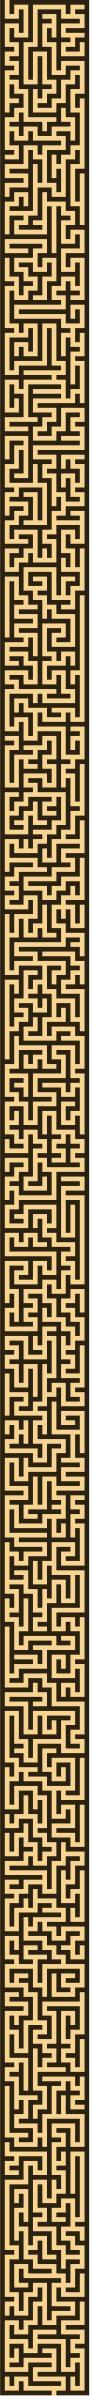 The Block Version of the Thin Maze png transparent